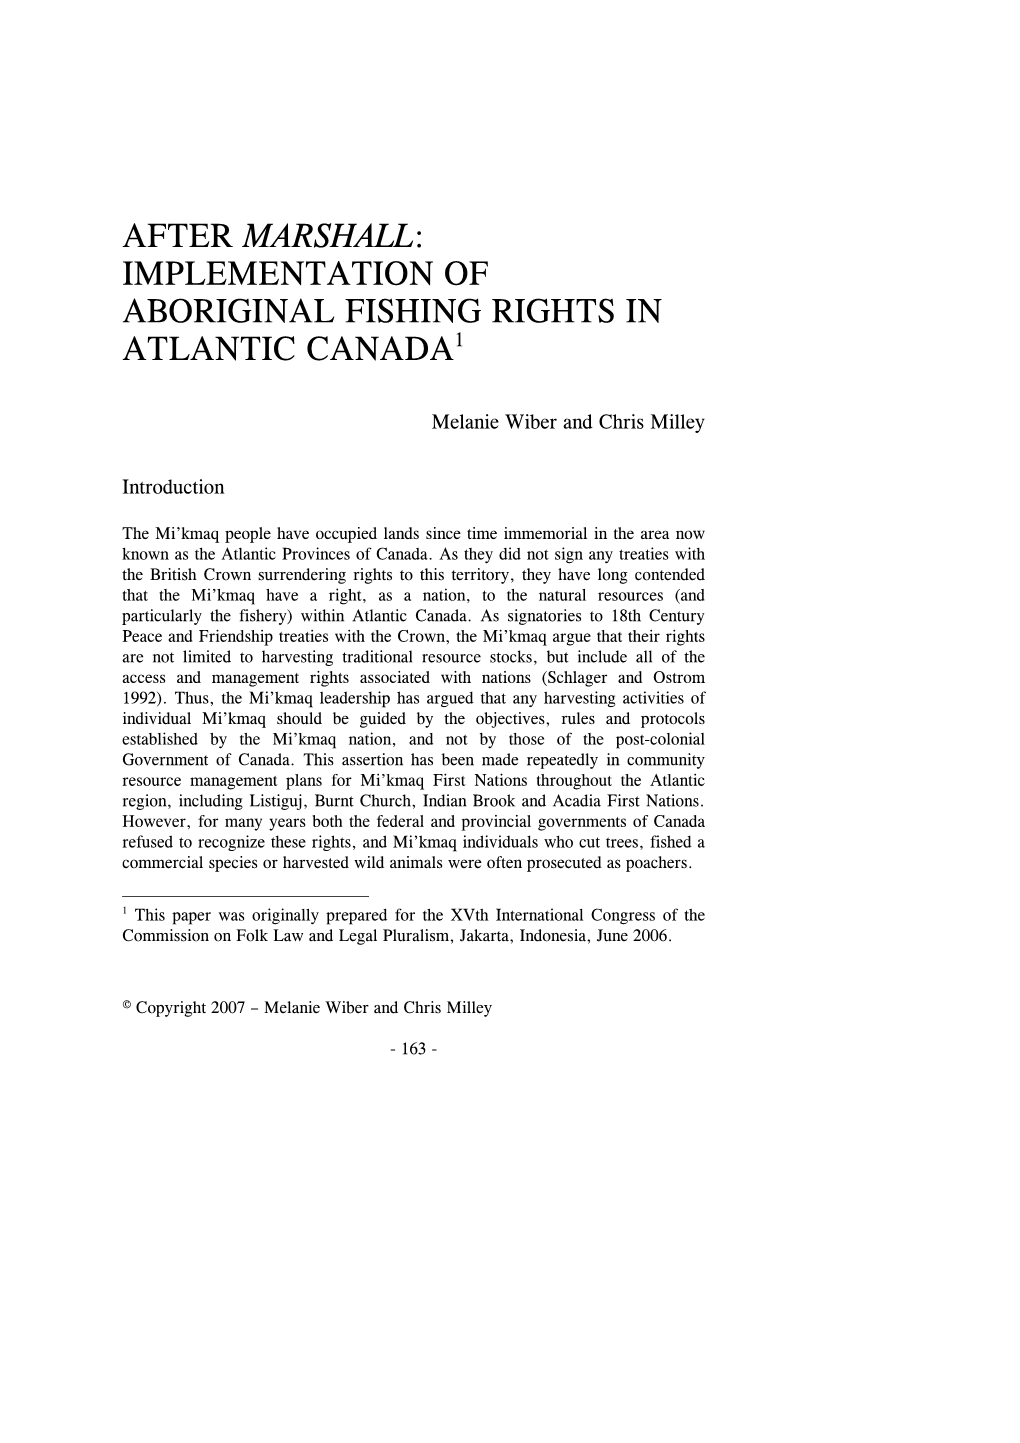 After Marshall: Implementation of Aboriginal Fishing Rights in Atlantic Canada1